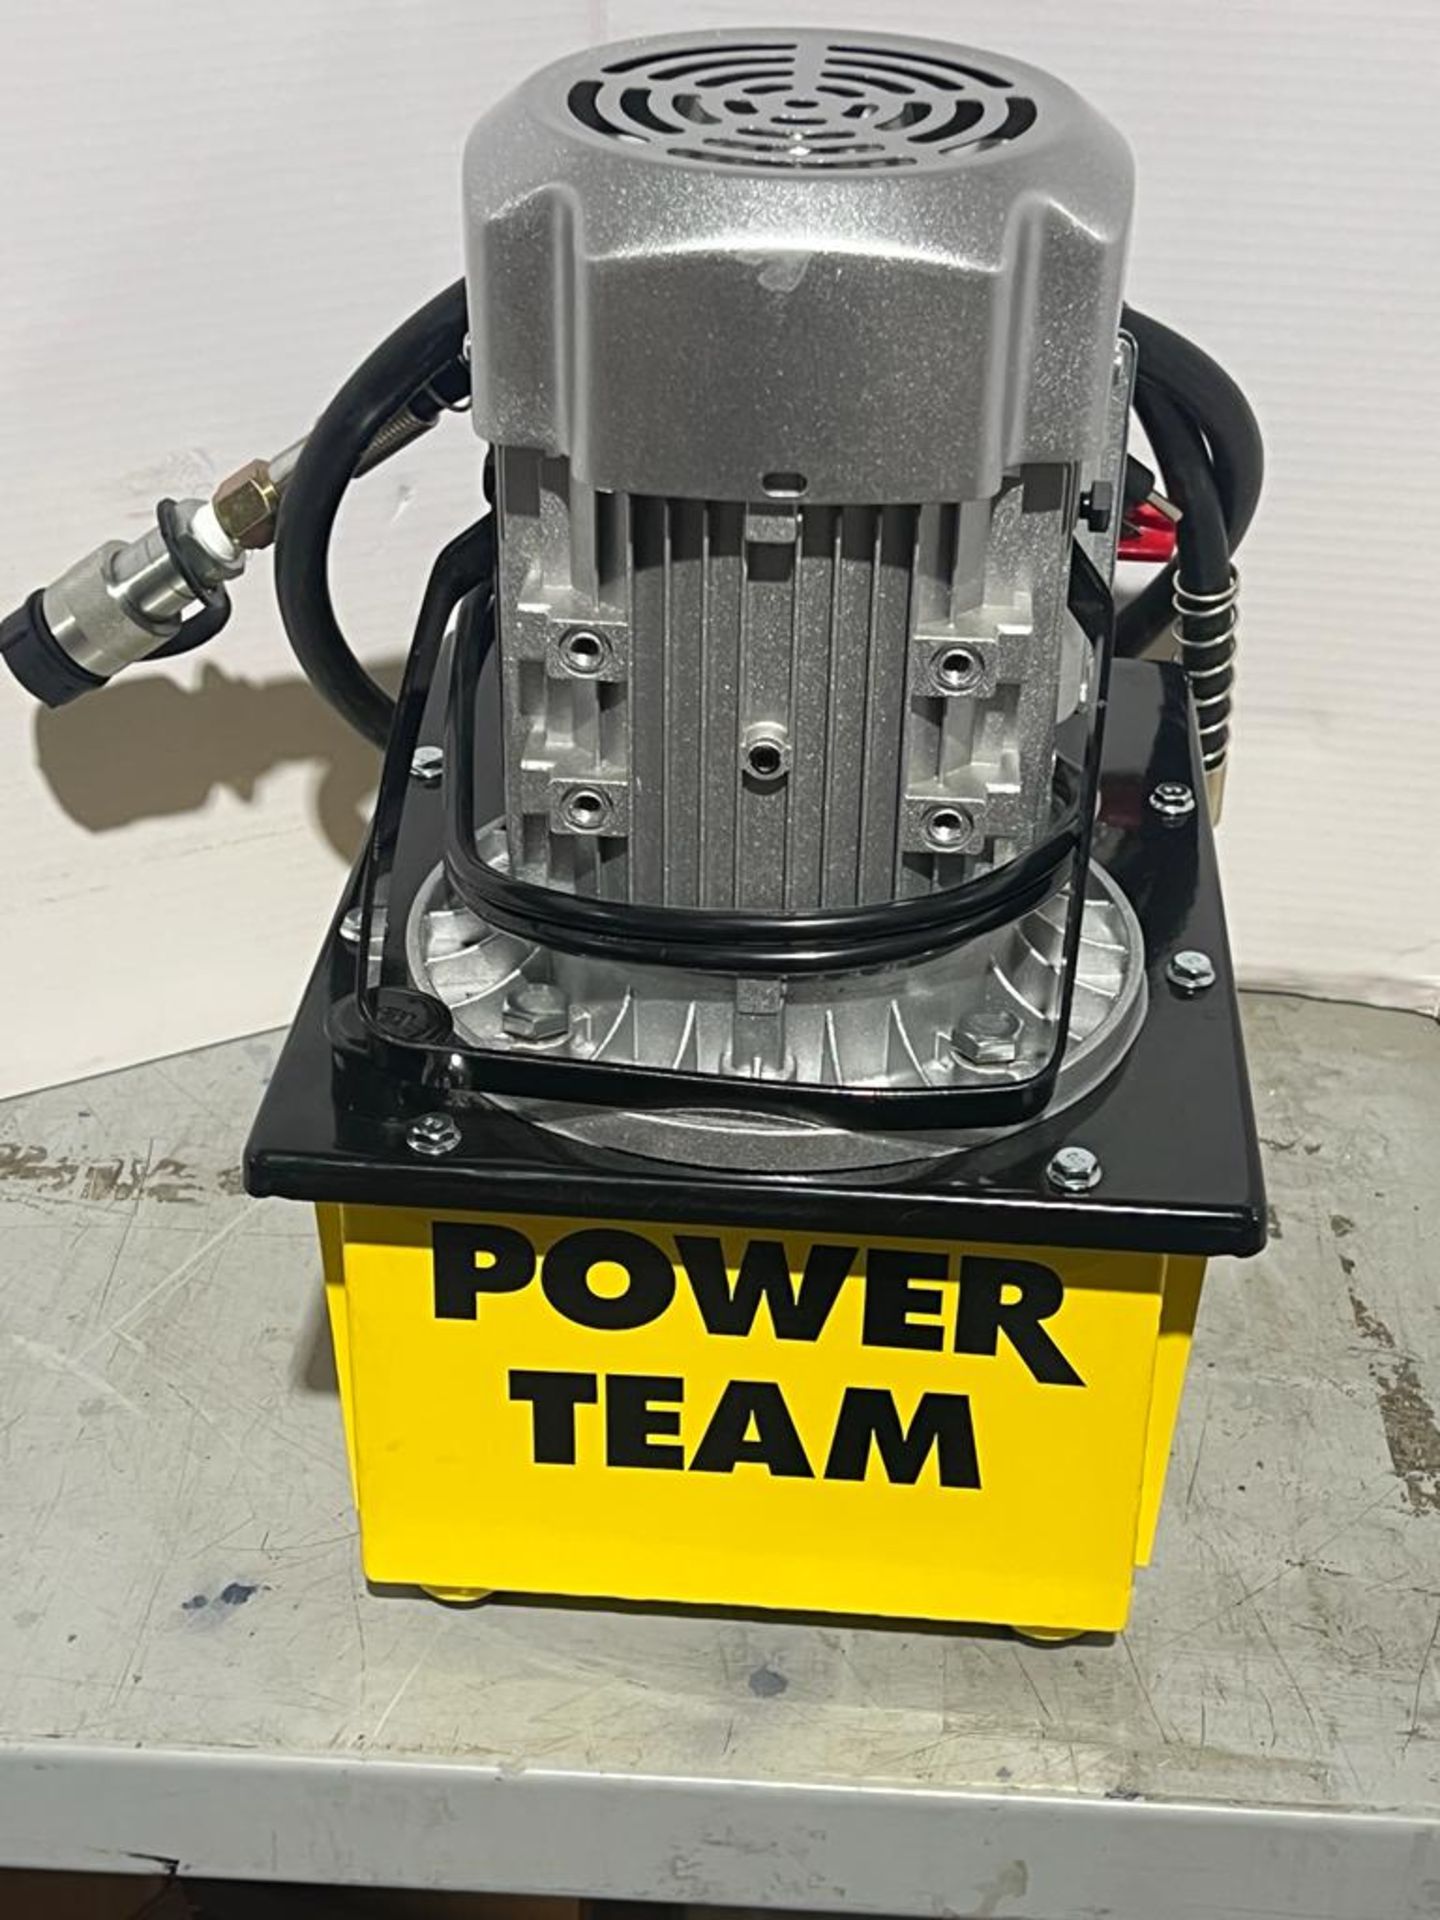 Power Team Hydraulics Electric Powerpack type - 120V single phase hydraulic pump - UNUSED & MINT - Image 3 of 3